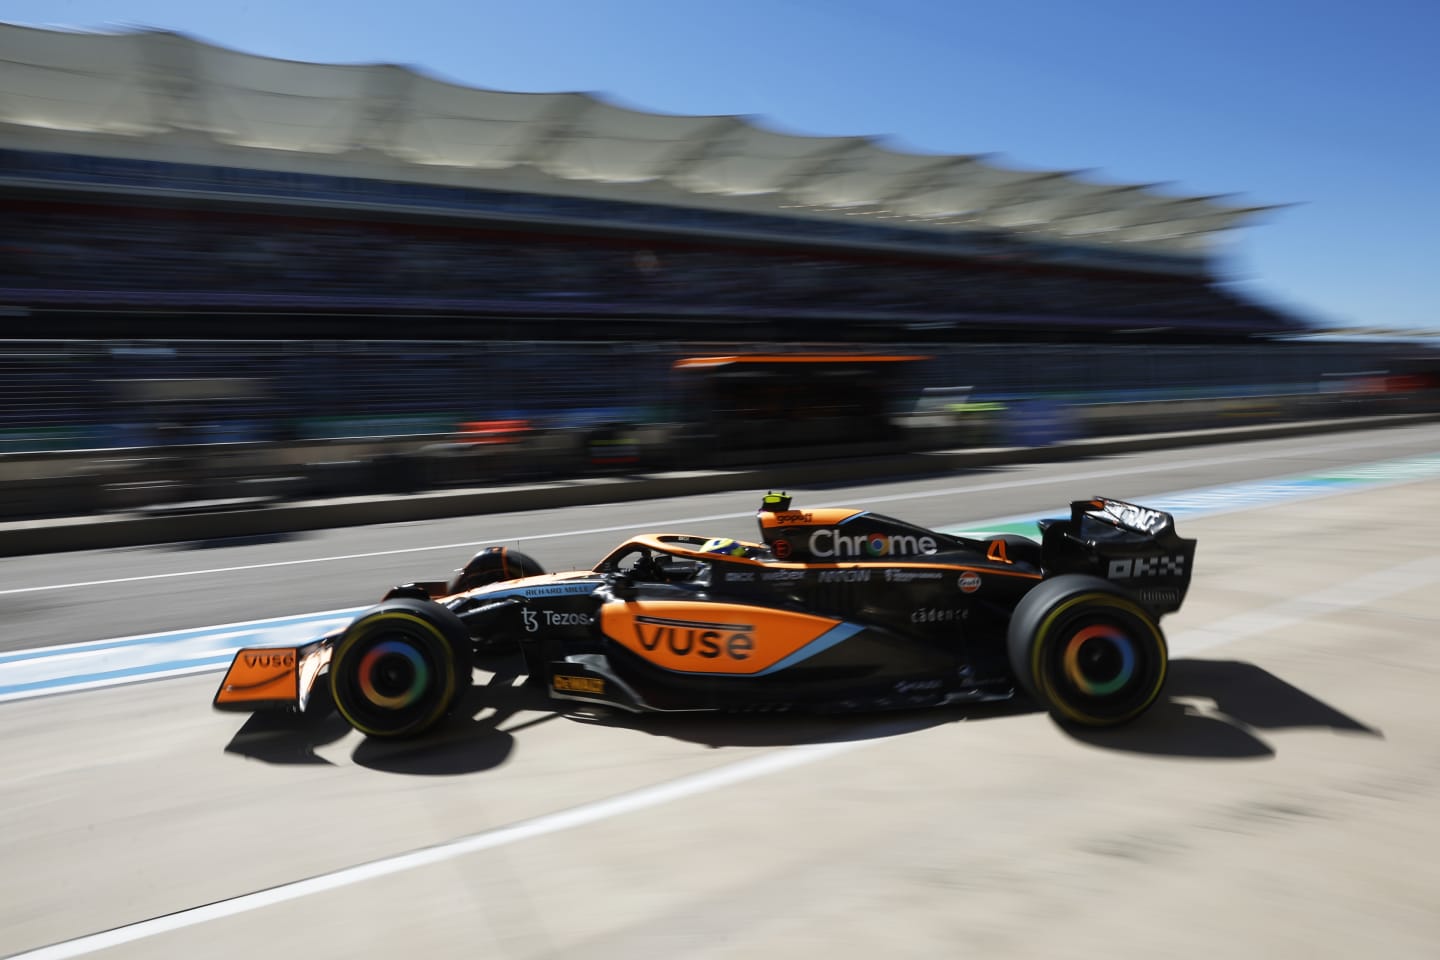 AUSTIN, TEXAS - OCTOBER 21: Lando Norris of Great Britain driving the (4) McLaren MCL36 Mercedes in the Pitlane during practice ahead of the F1 Grand Prix of USA at Circuit of The Americas on October 21, 2022 in Austin, Texas. (Photo by Chris Graythen/Getty Images)